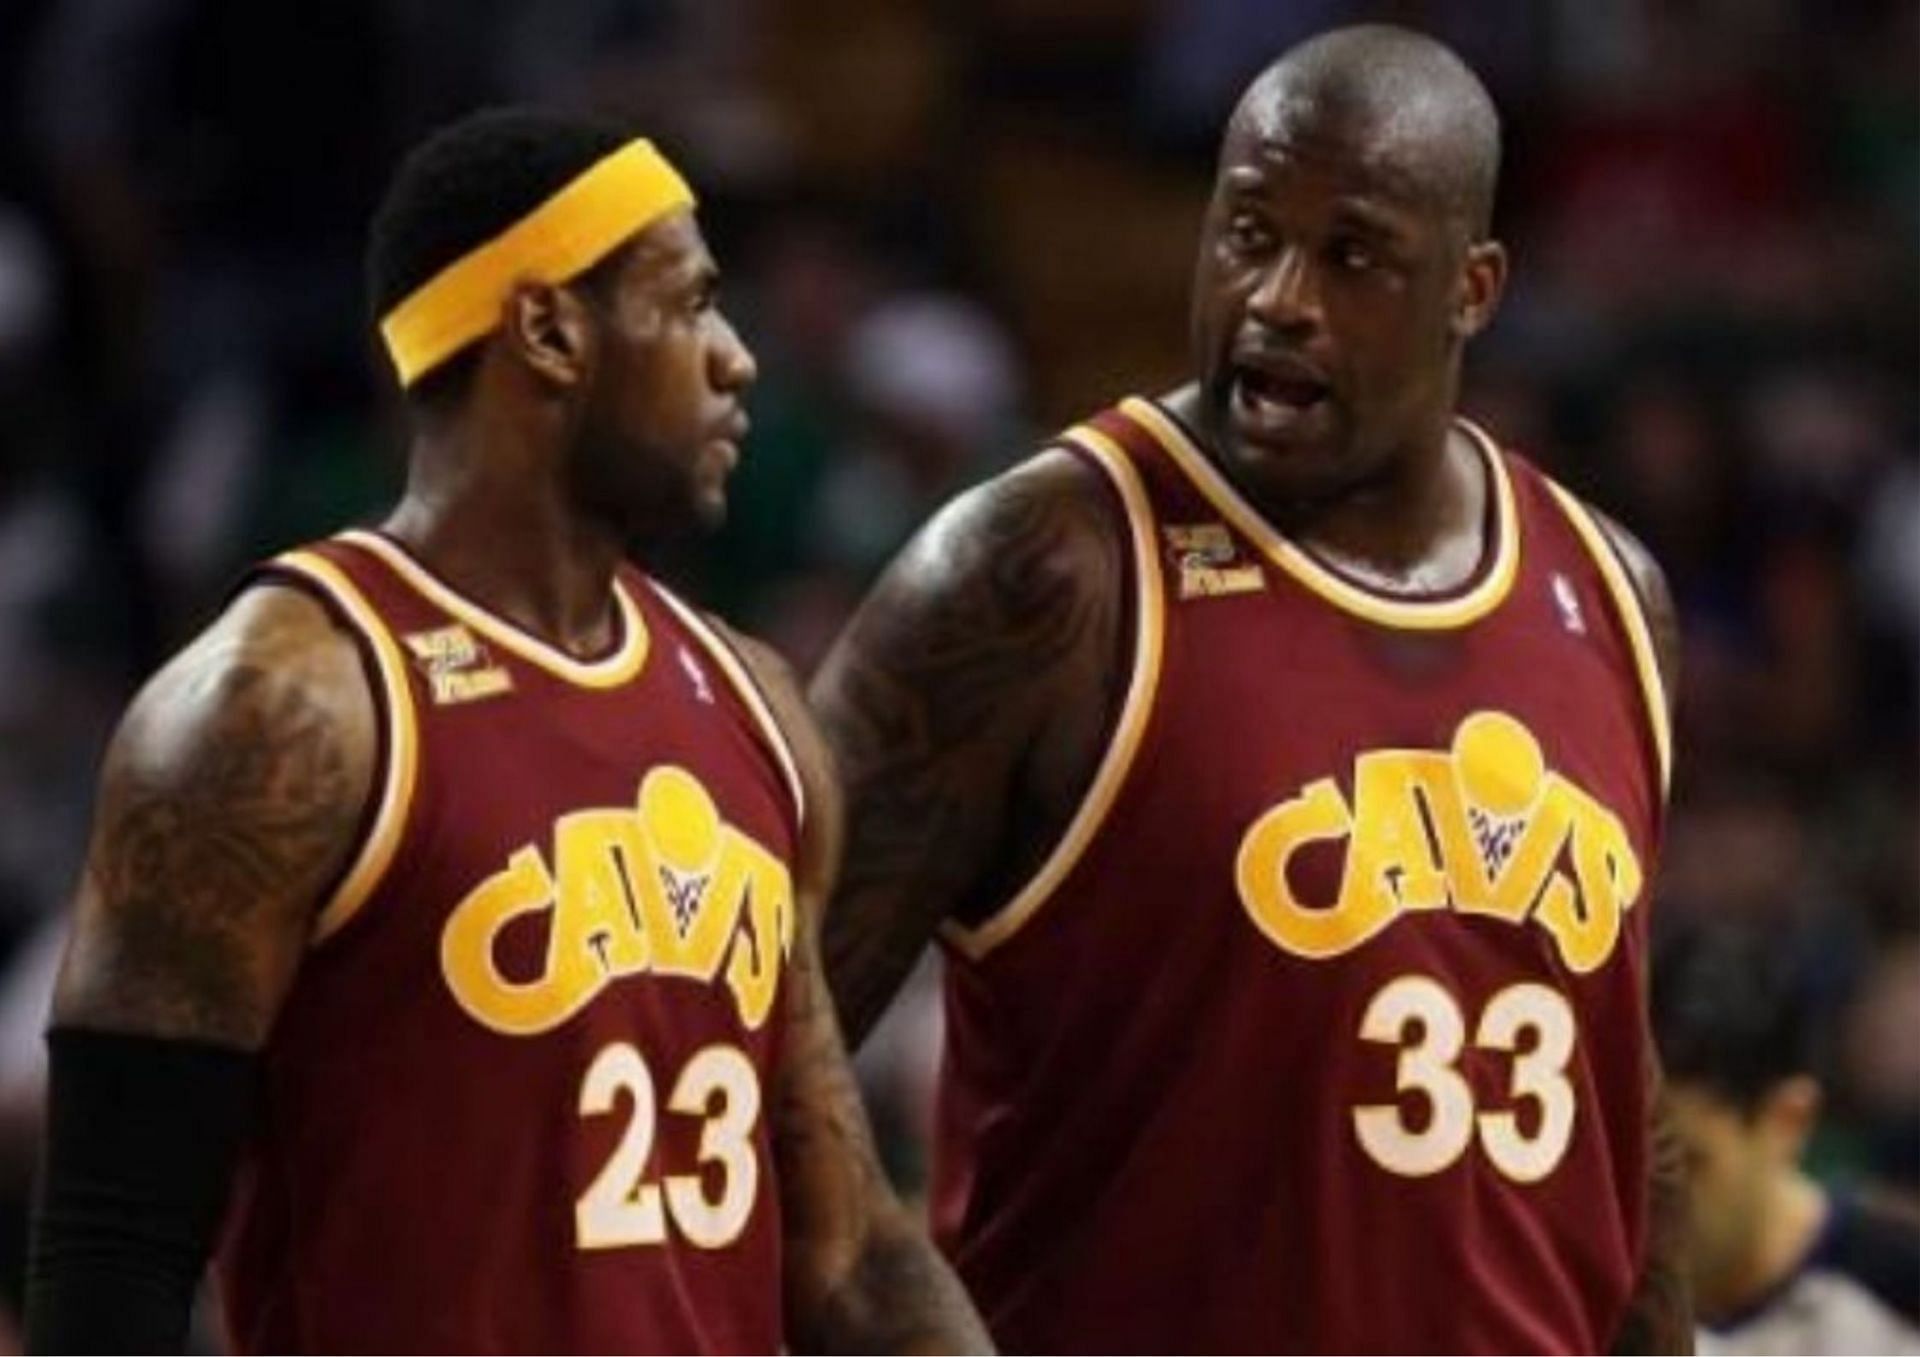 Shaq and LeBron James were teammates during the 2009-10 season with the Cleveland Cavaliers.